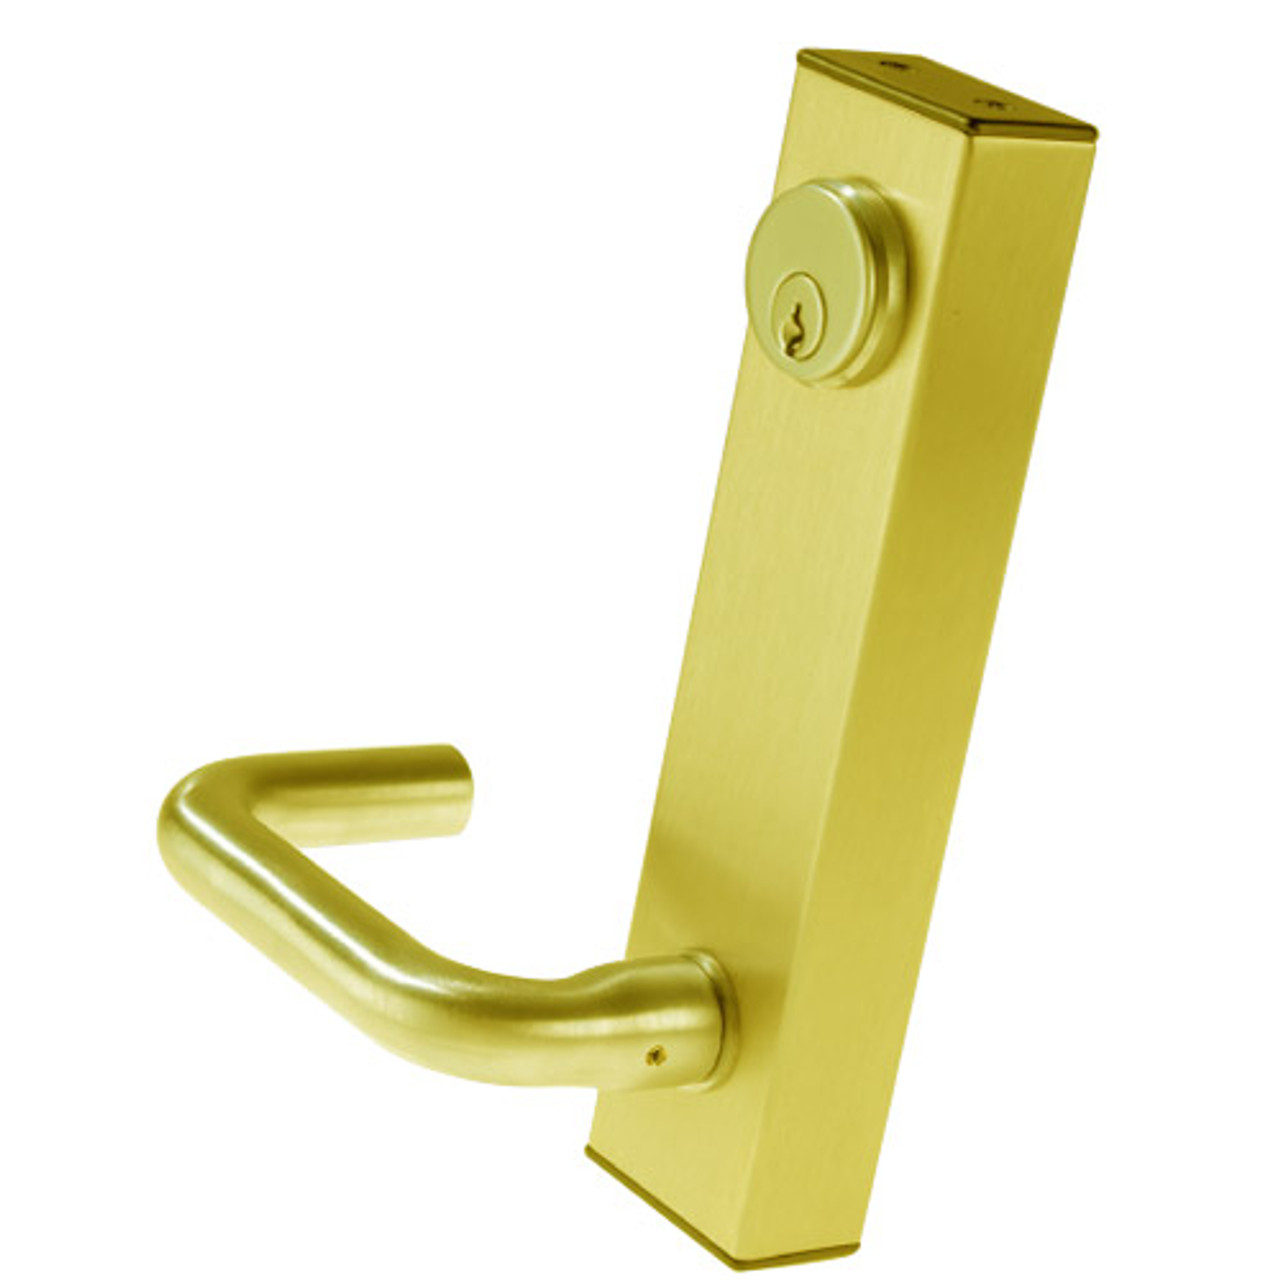 3080-02-0-34-US3 Adams Rite Standard Entry Trim with Round Lever in Bright Brass Finish